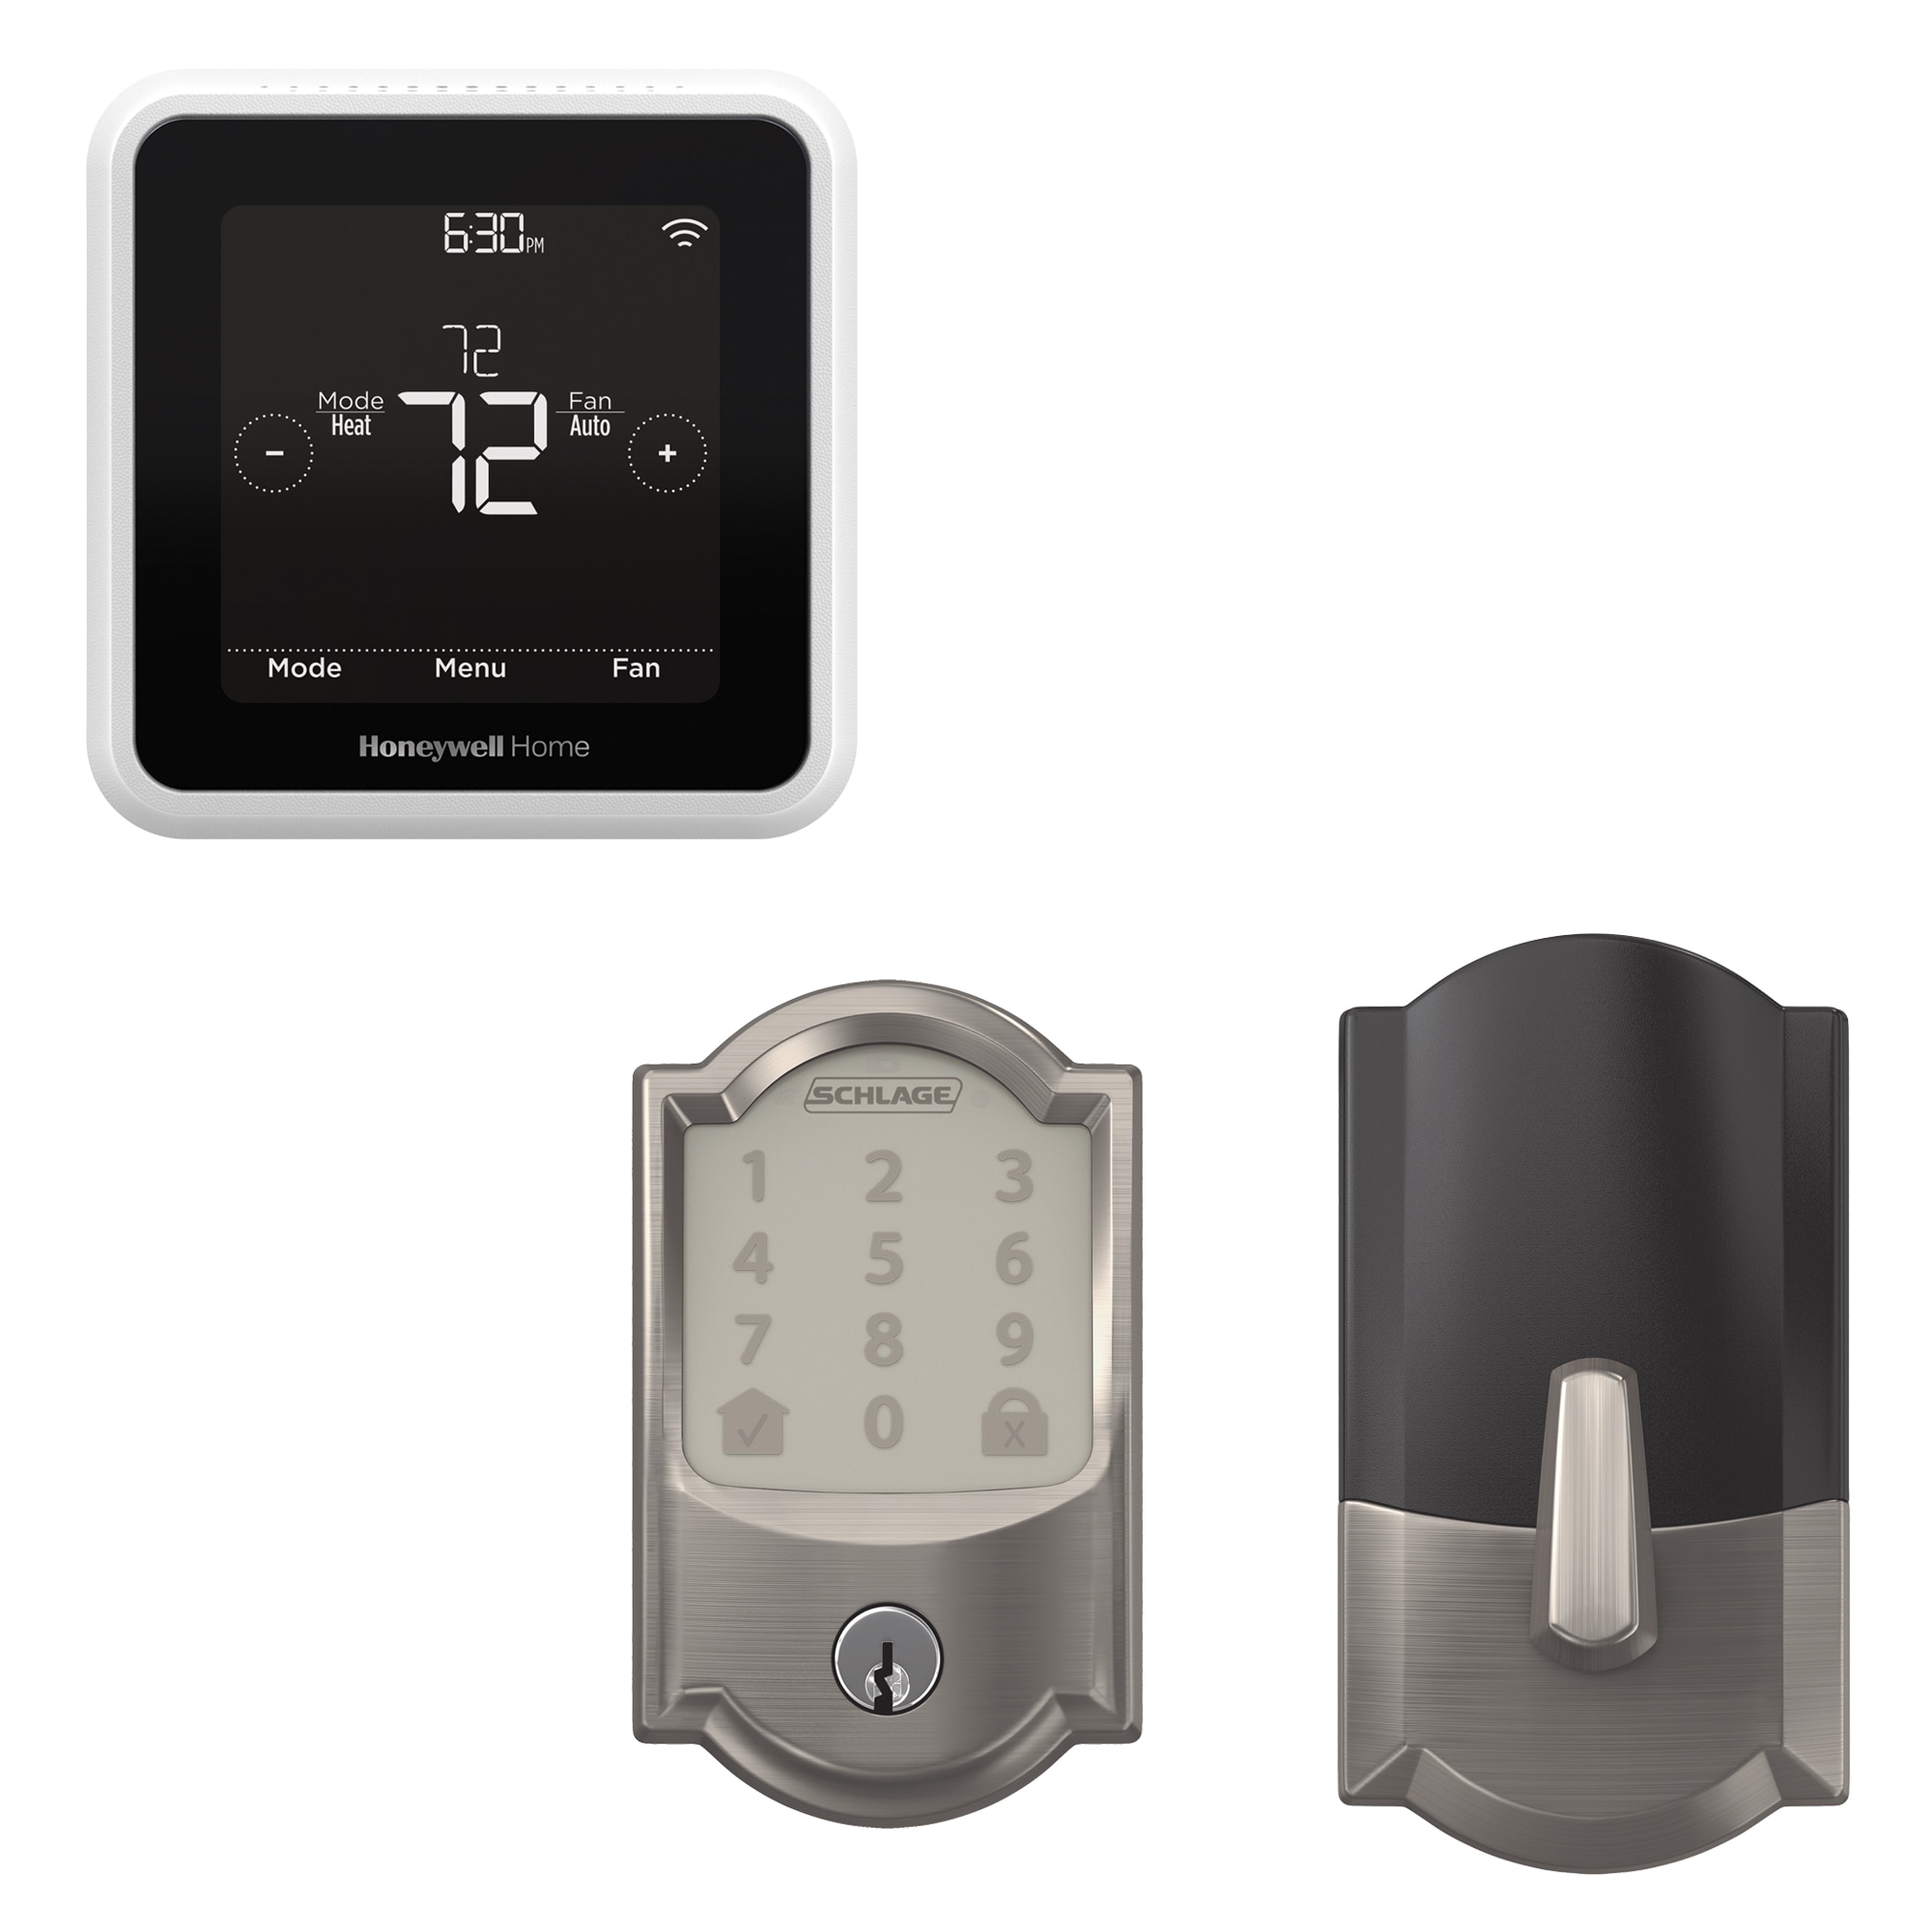 Honeywell Home RTH8800WF T5 Smart Black/White Thermostat with Wi-Fi Compatibility with Schlage Encode Camelot Satin Nickel Smart Electronic Deadbolt